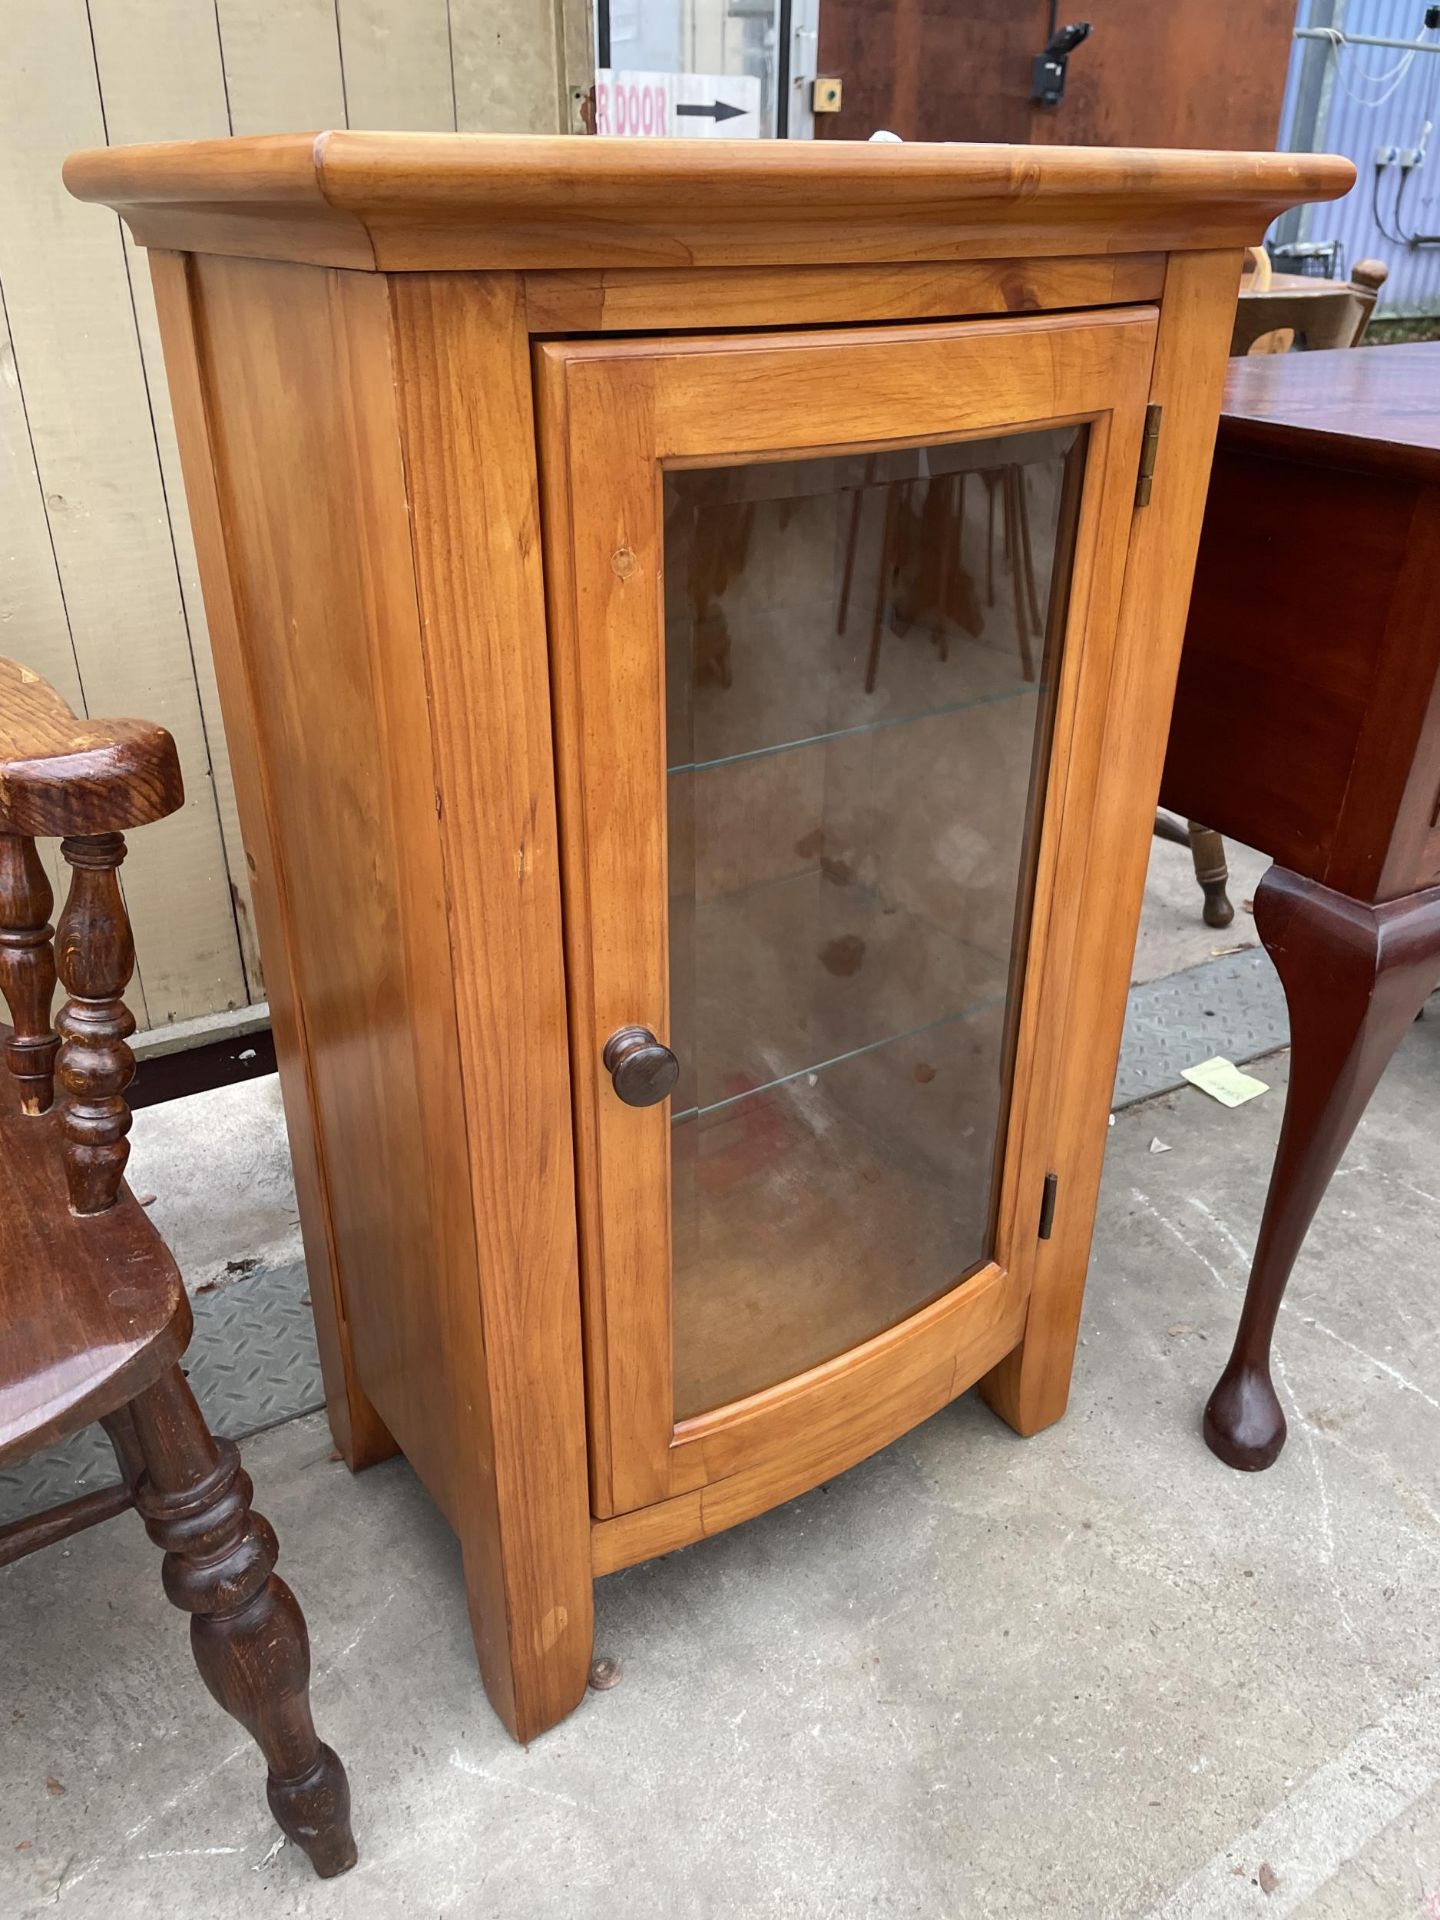 A BOW FRONTED CABINET WITH GLASS DOOR 24" WIDE - Image 2 of 3